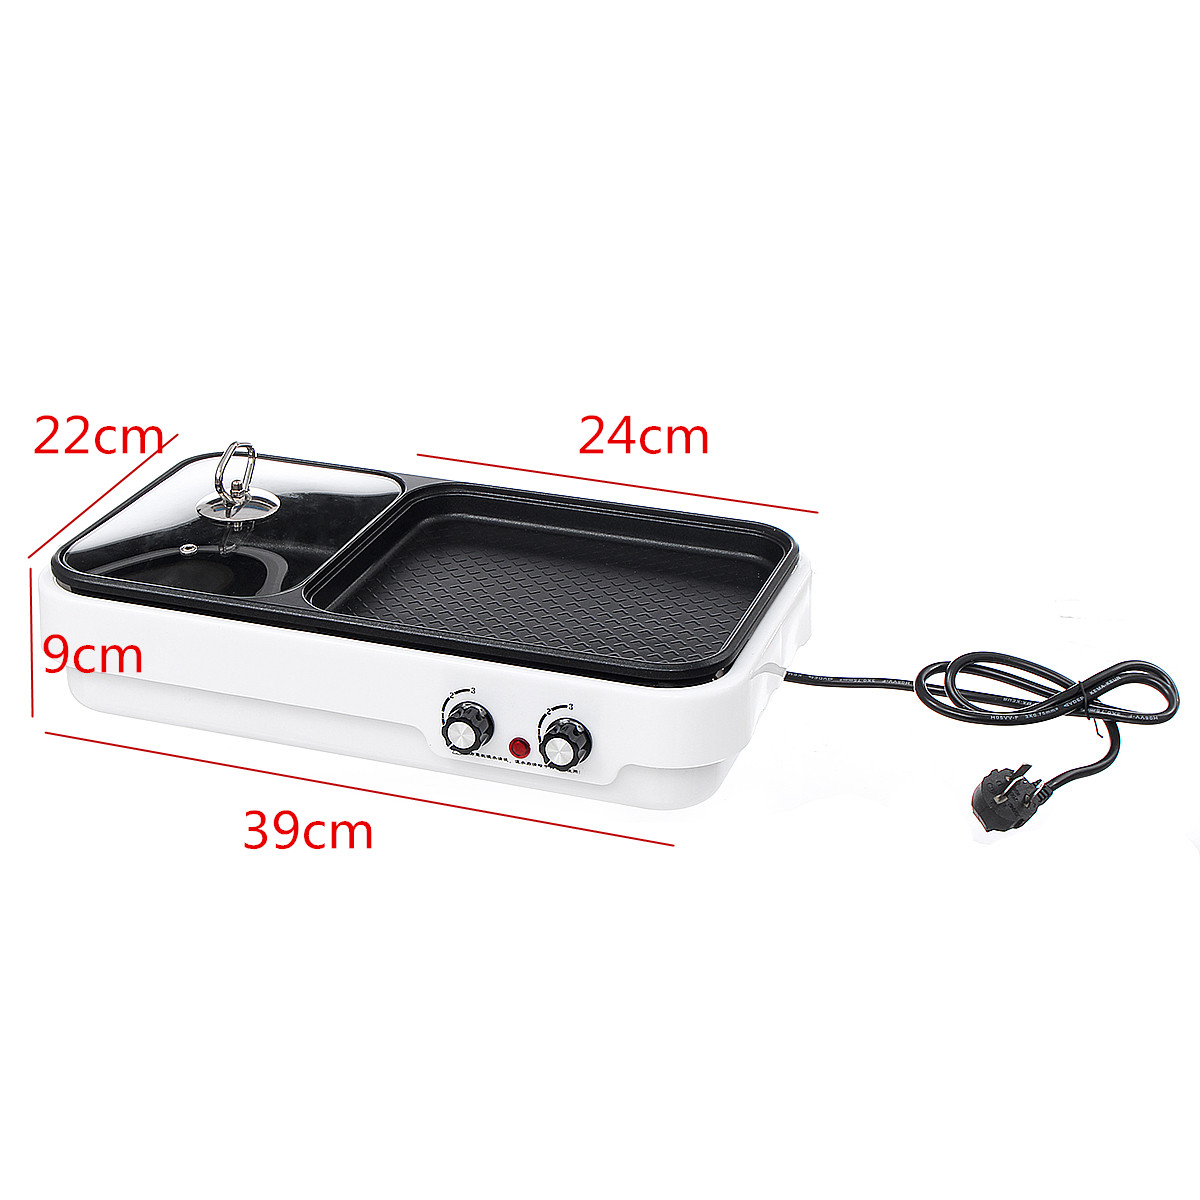 Electric Baking Pan Barbecue Hot Pot Non Stick BBQ Grill Oven Kitchen Cookware 25